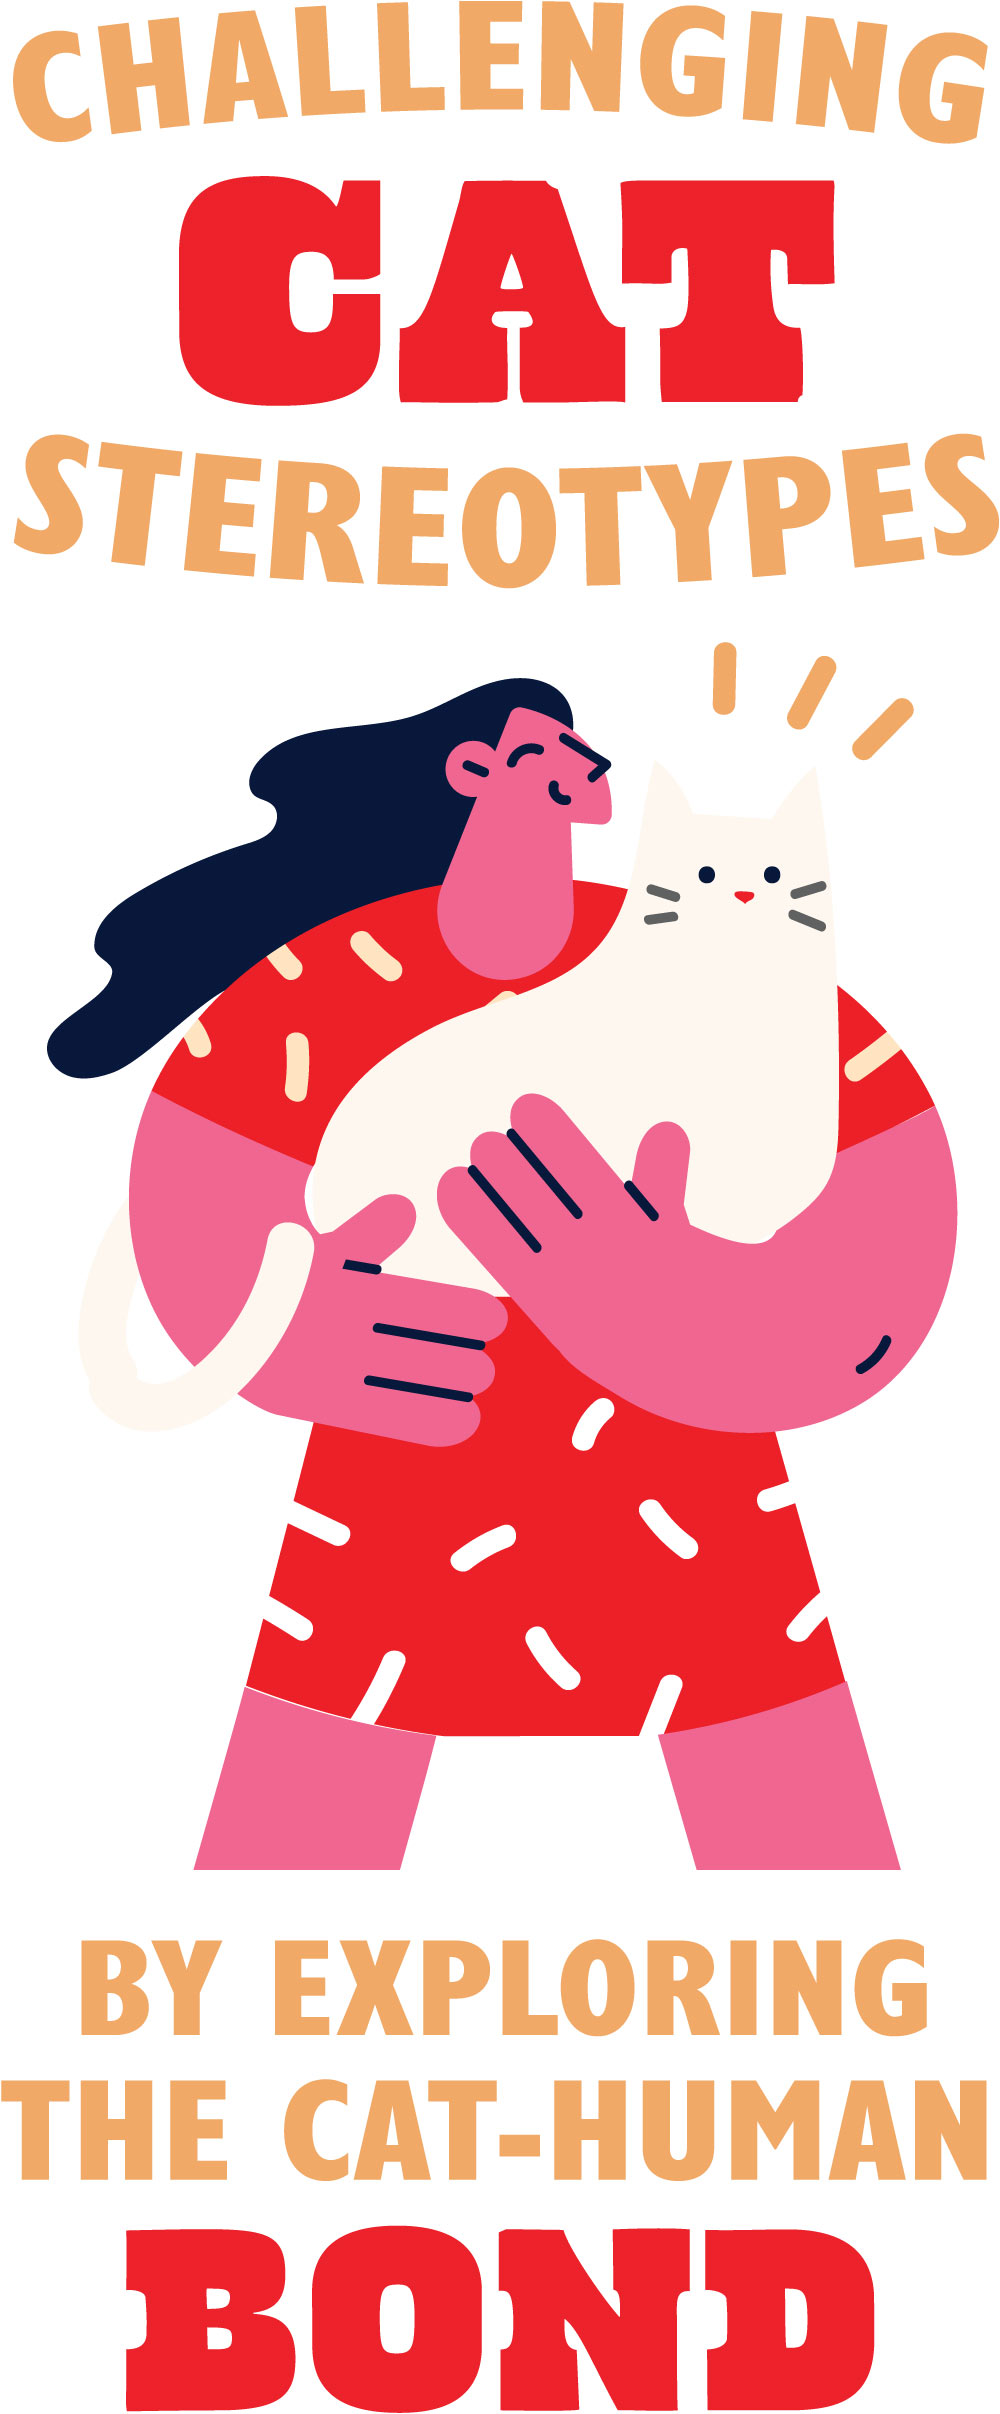 Challenging Cat Stereotypes by Exploring the Cat-Human Bond typography with an illustration of a pink lady in a patterned red dress holding a white ca